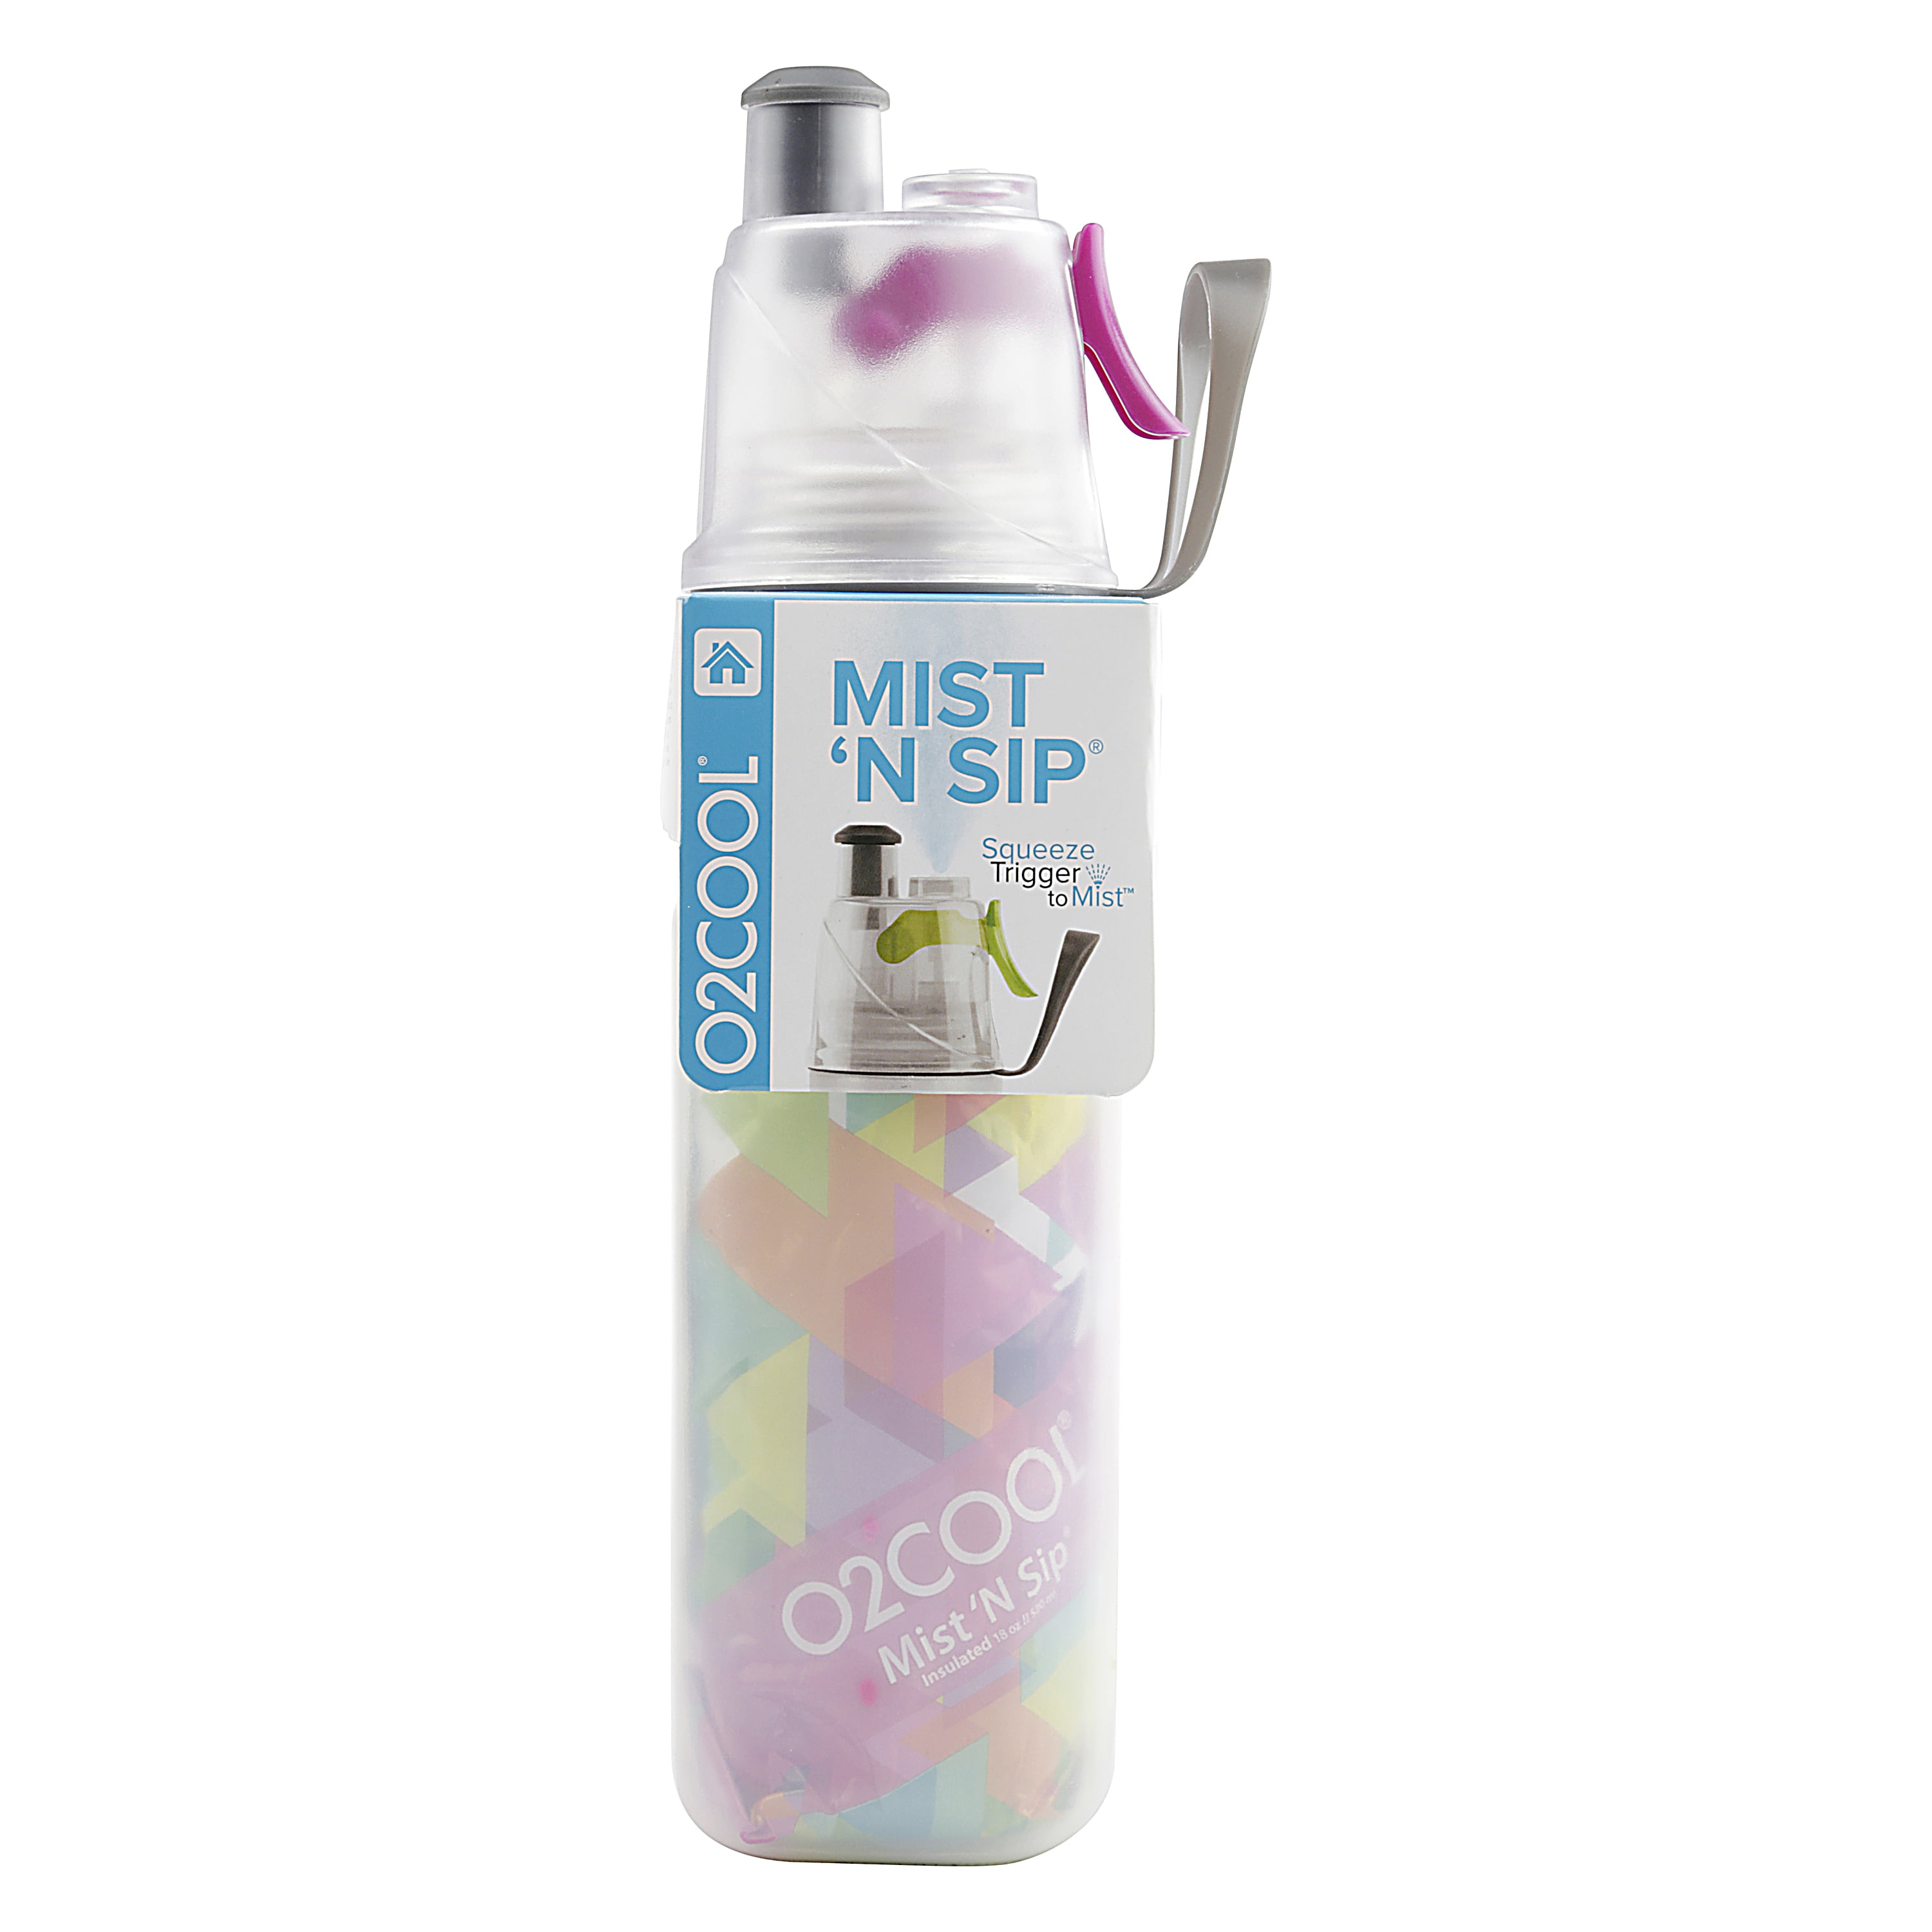 o2cool mist not working